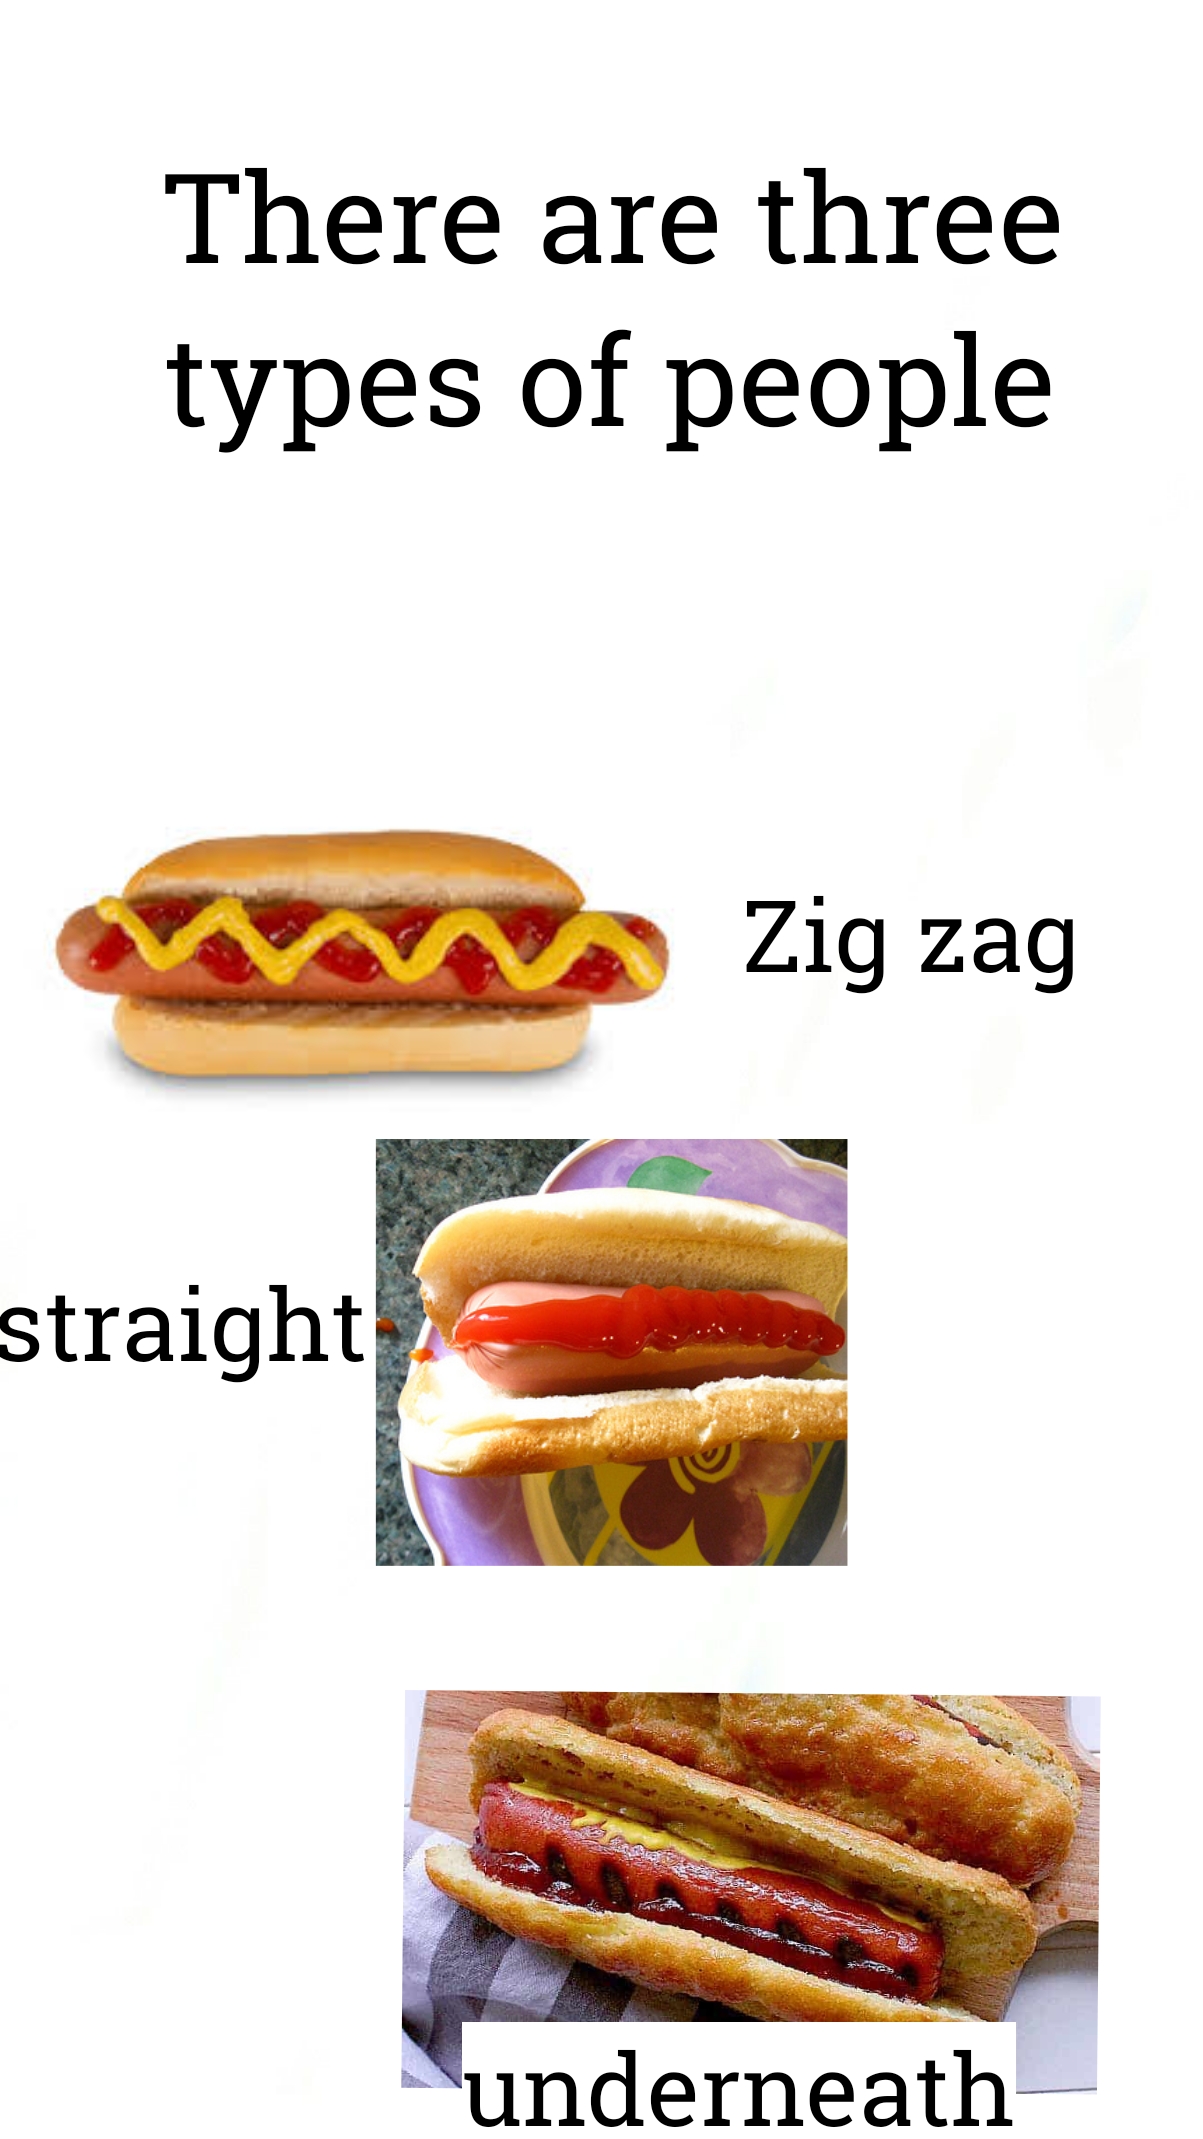 hot dog - There are three types of people Zig zag straight underneath